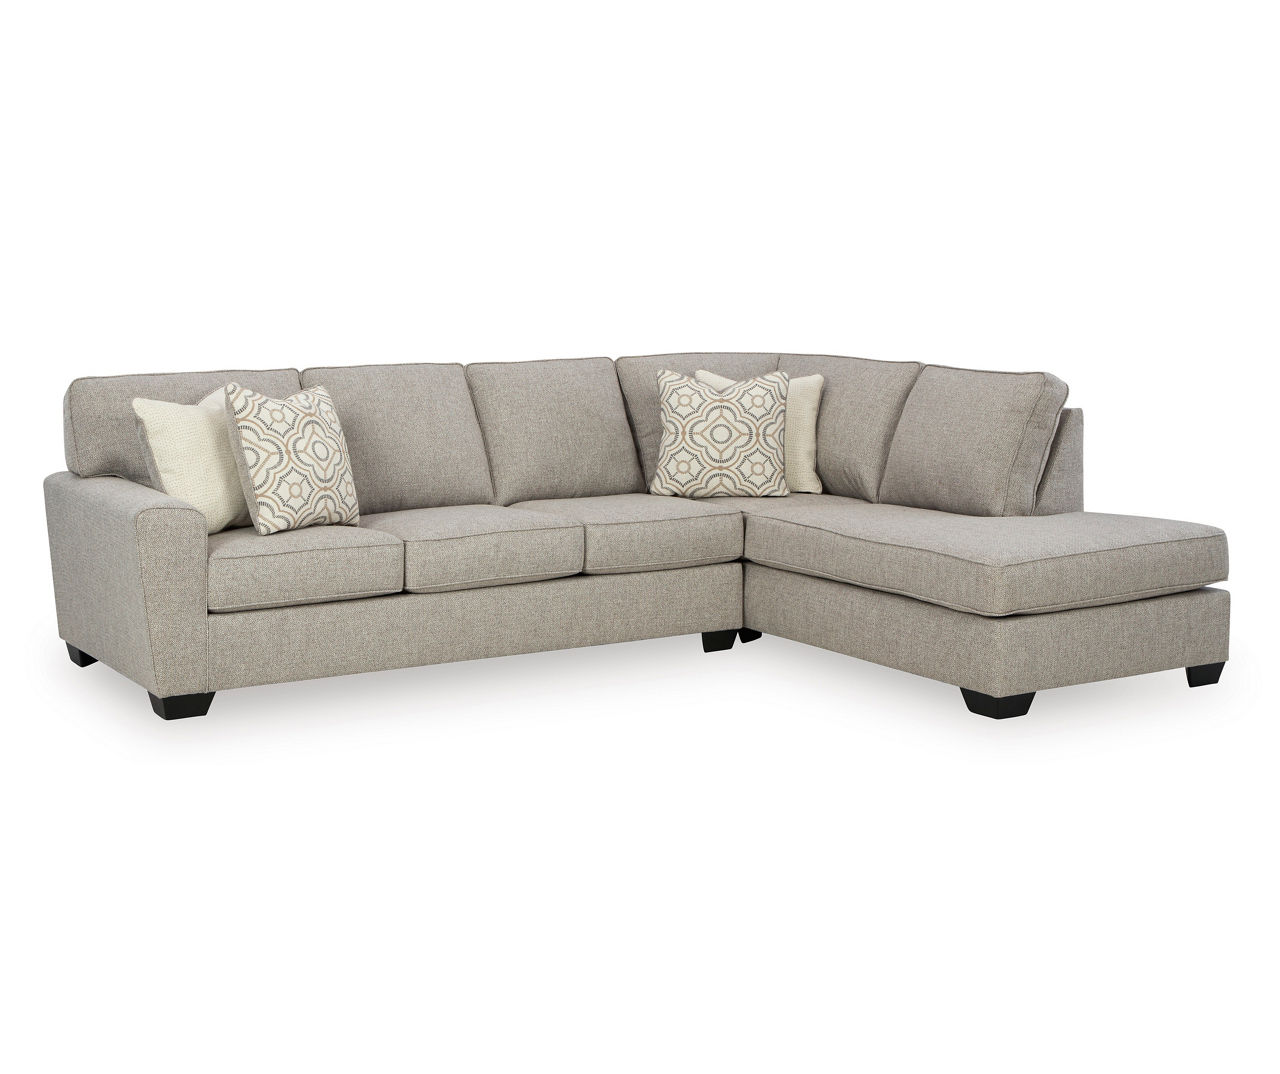 Broyhill Reydell Dune Sectional Big Lots